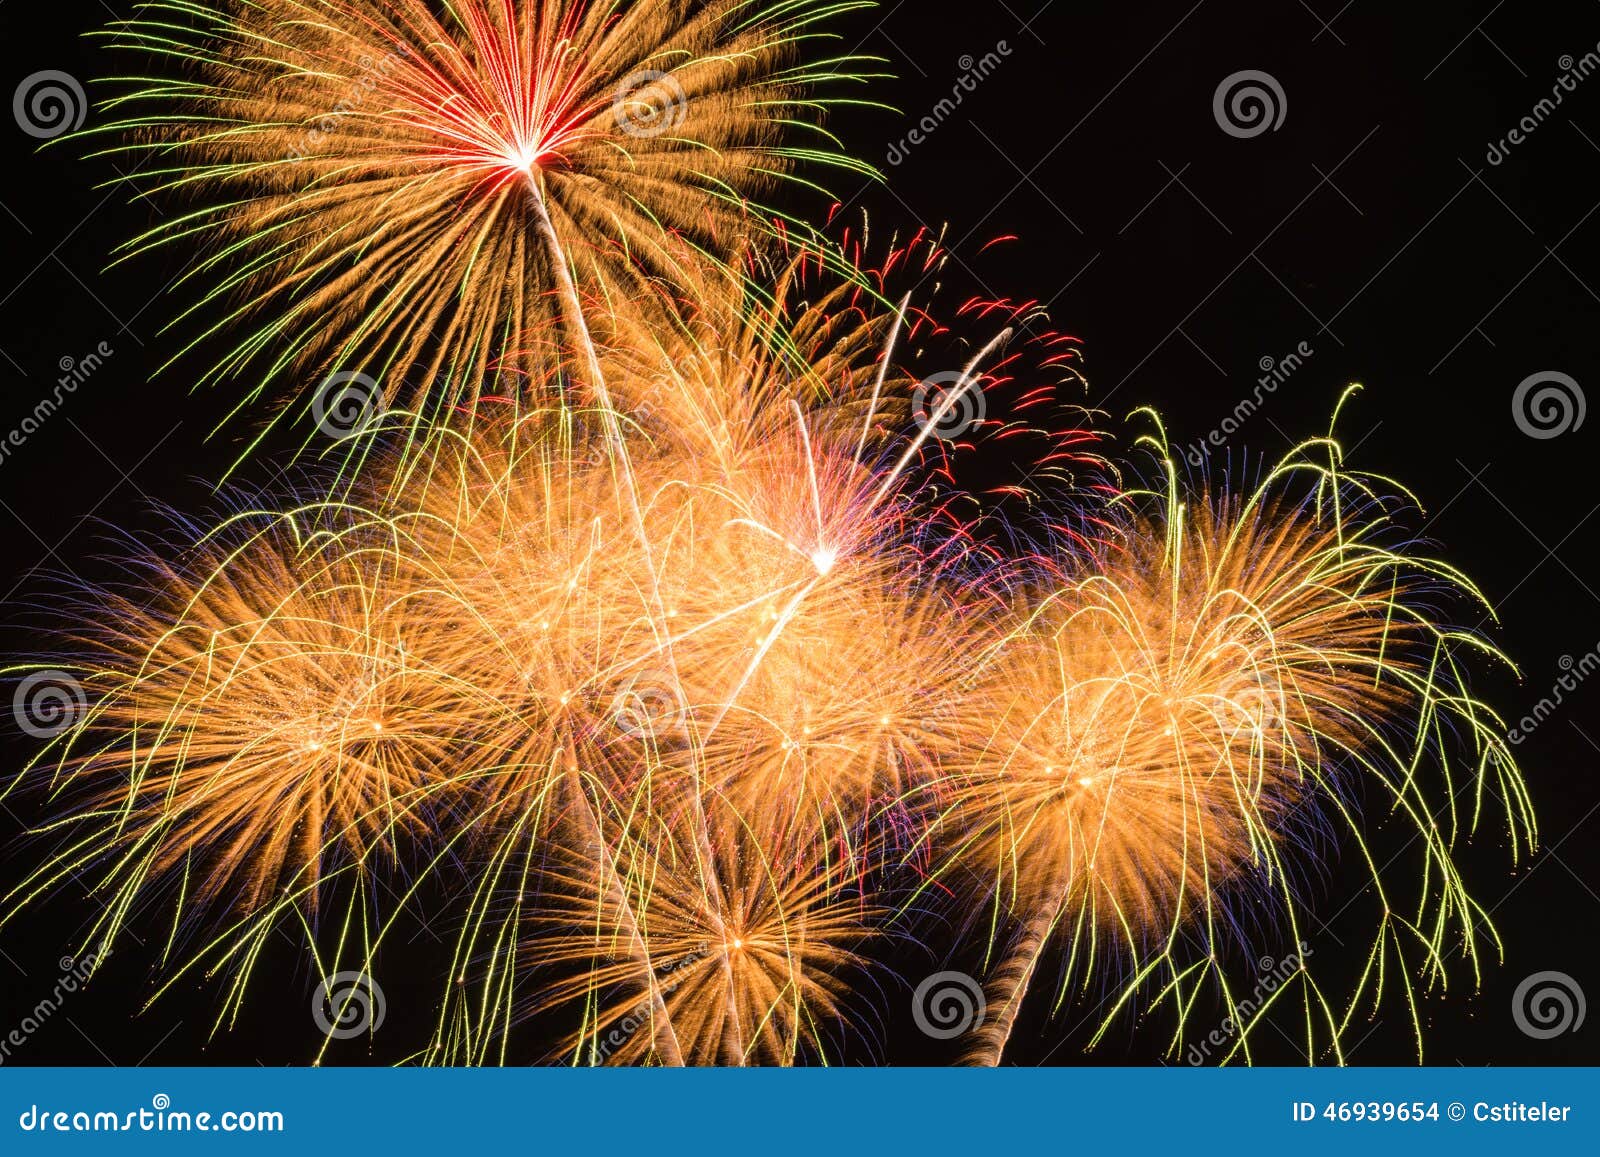 Feux d'artifice. Bright orange fireworks explosions lighting up the sky